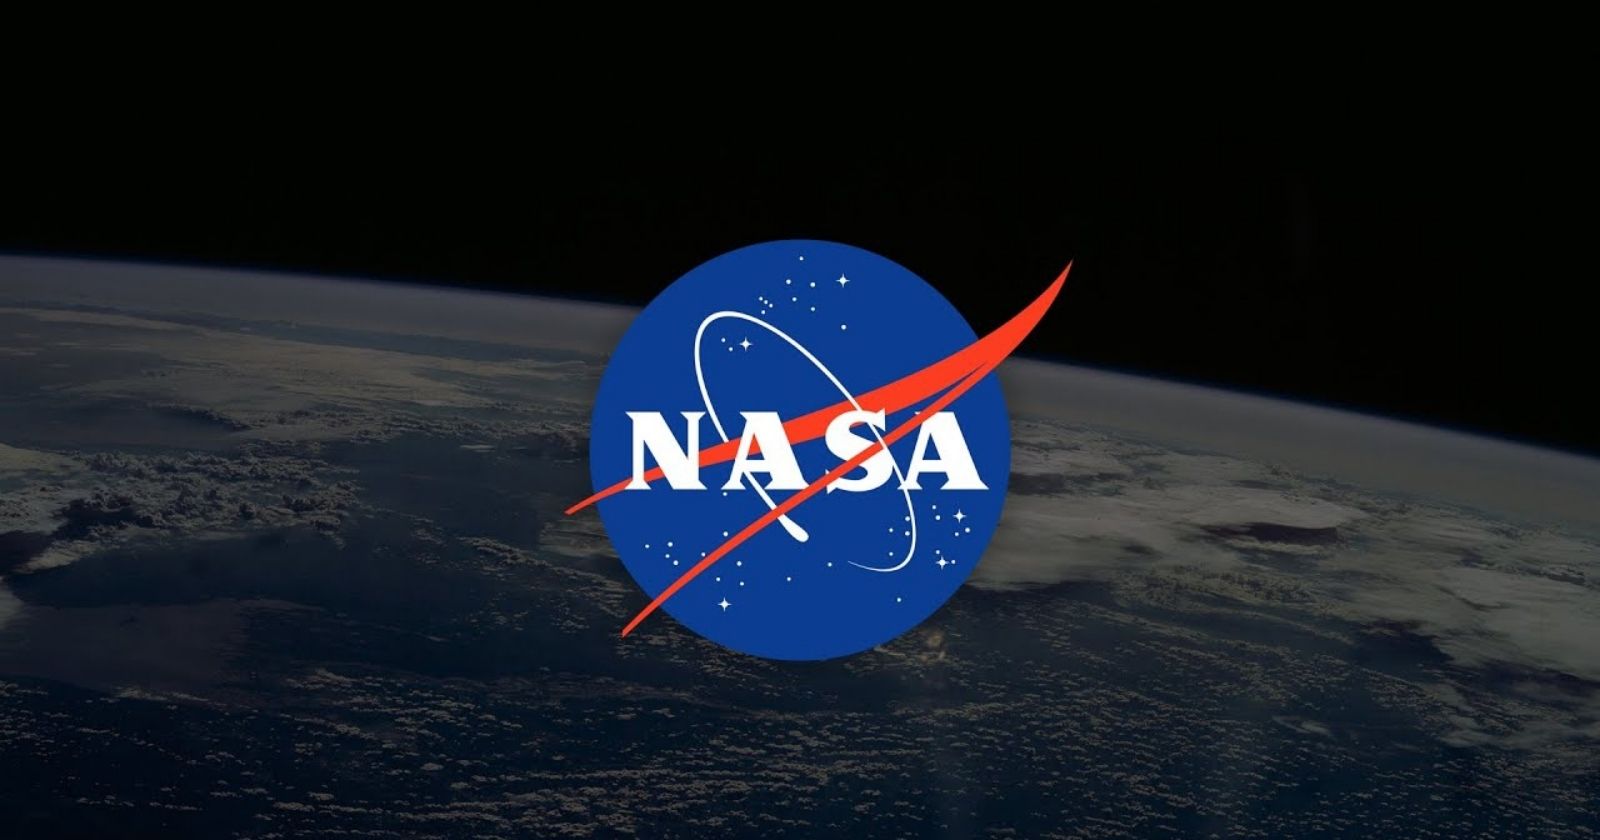 Space enthusiasts here! NASA launches its free platform